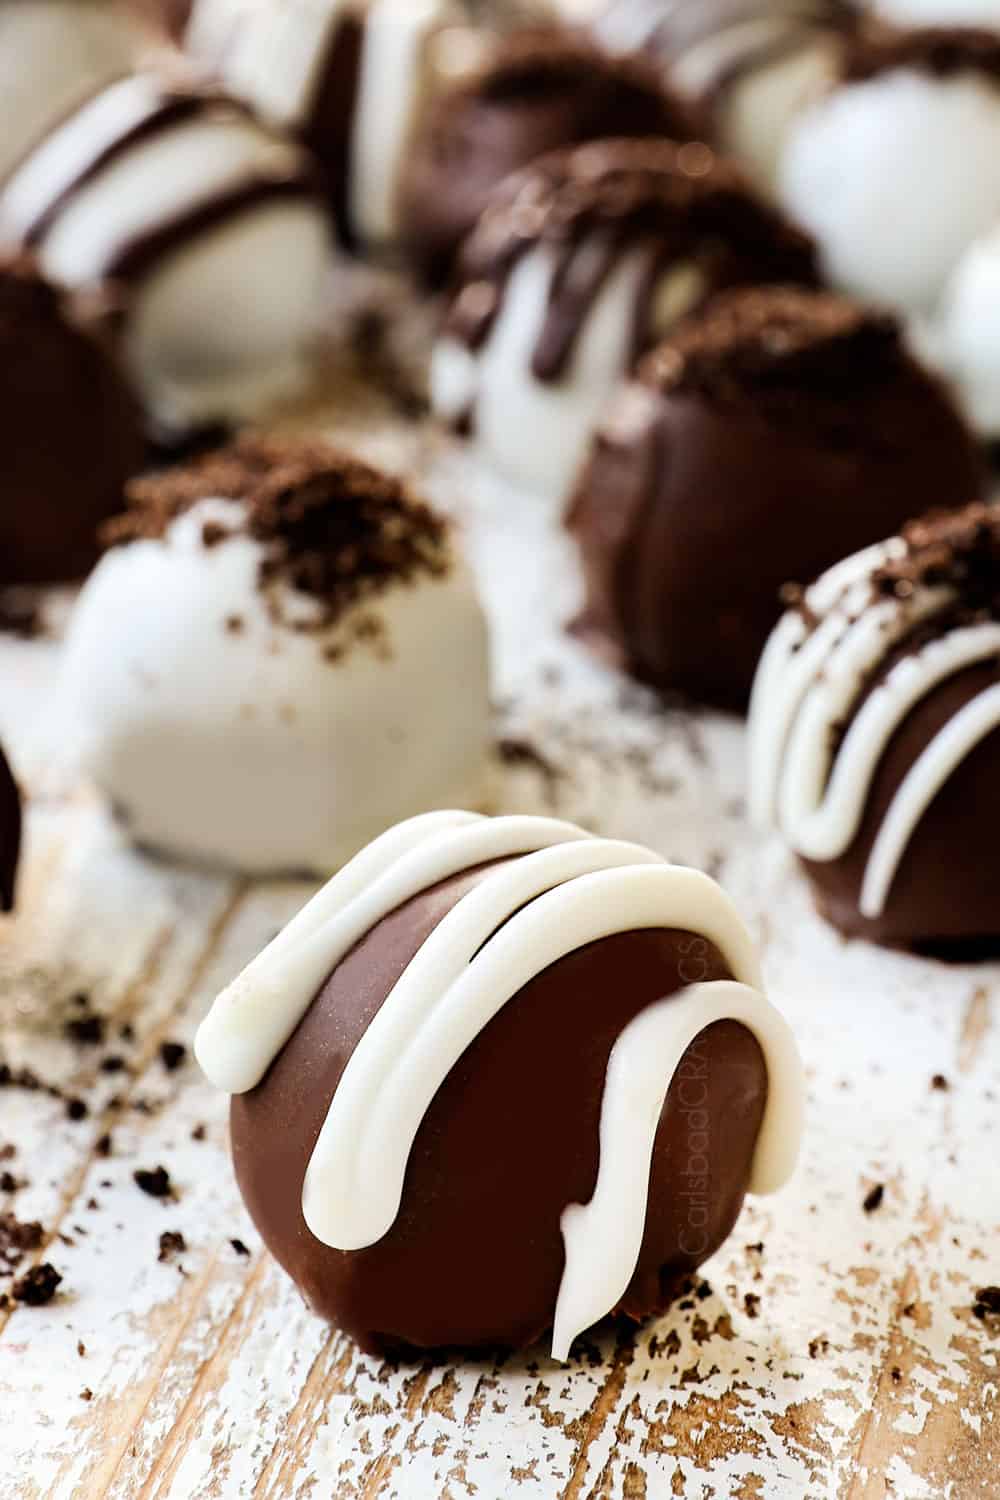 Oreo Balls drizzled with chocolate